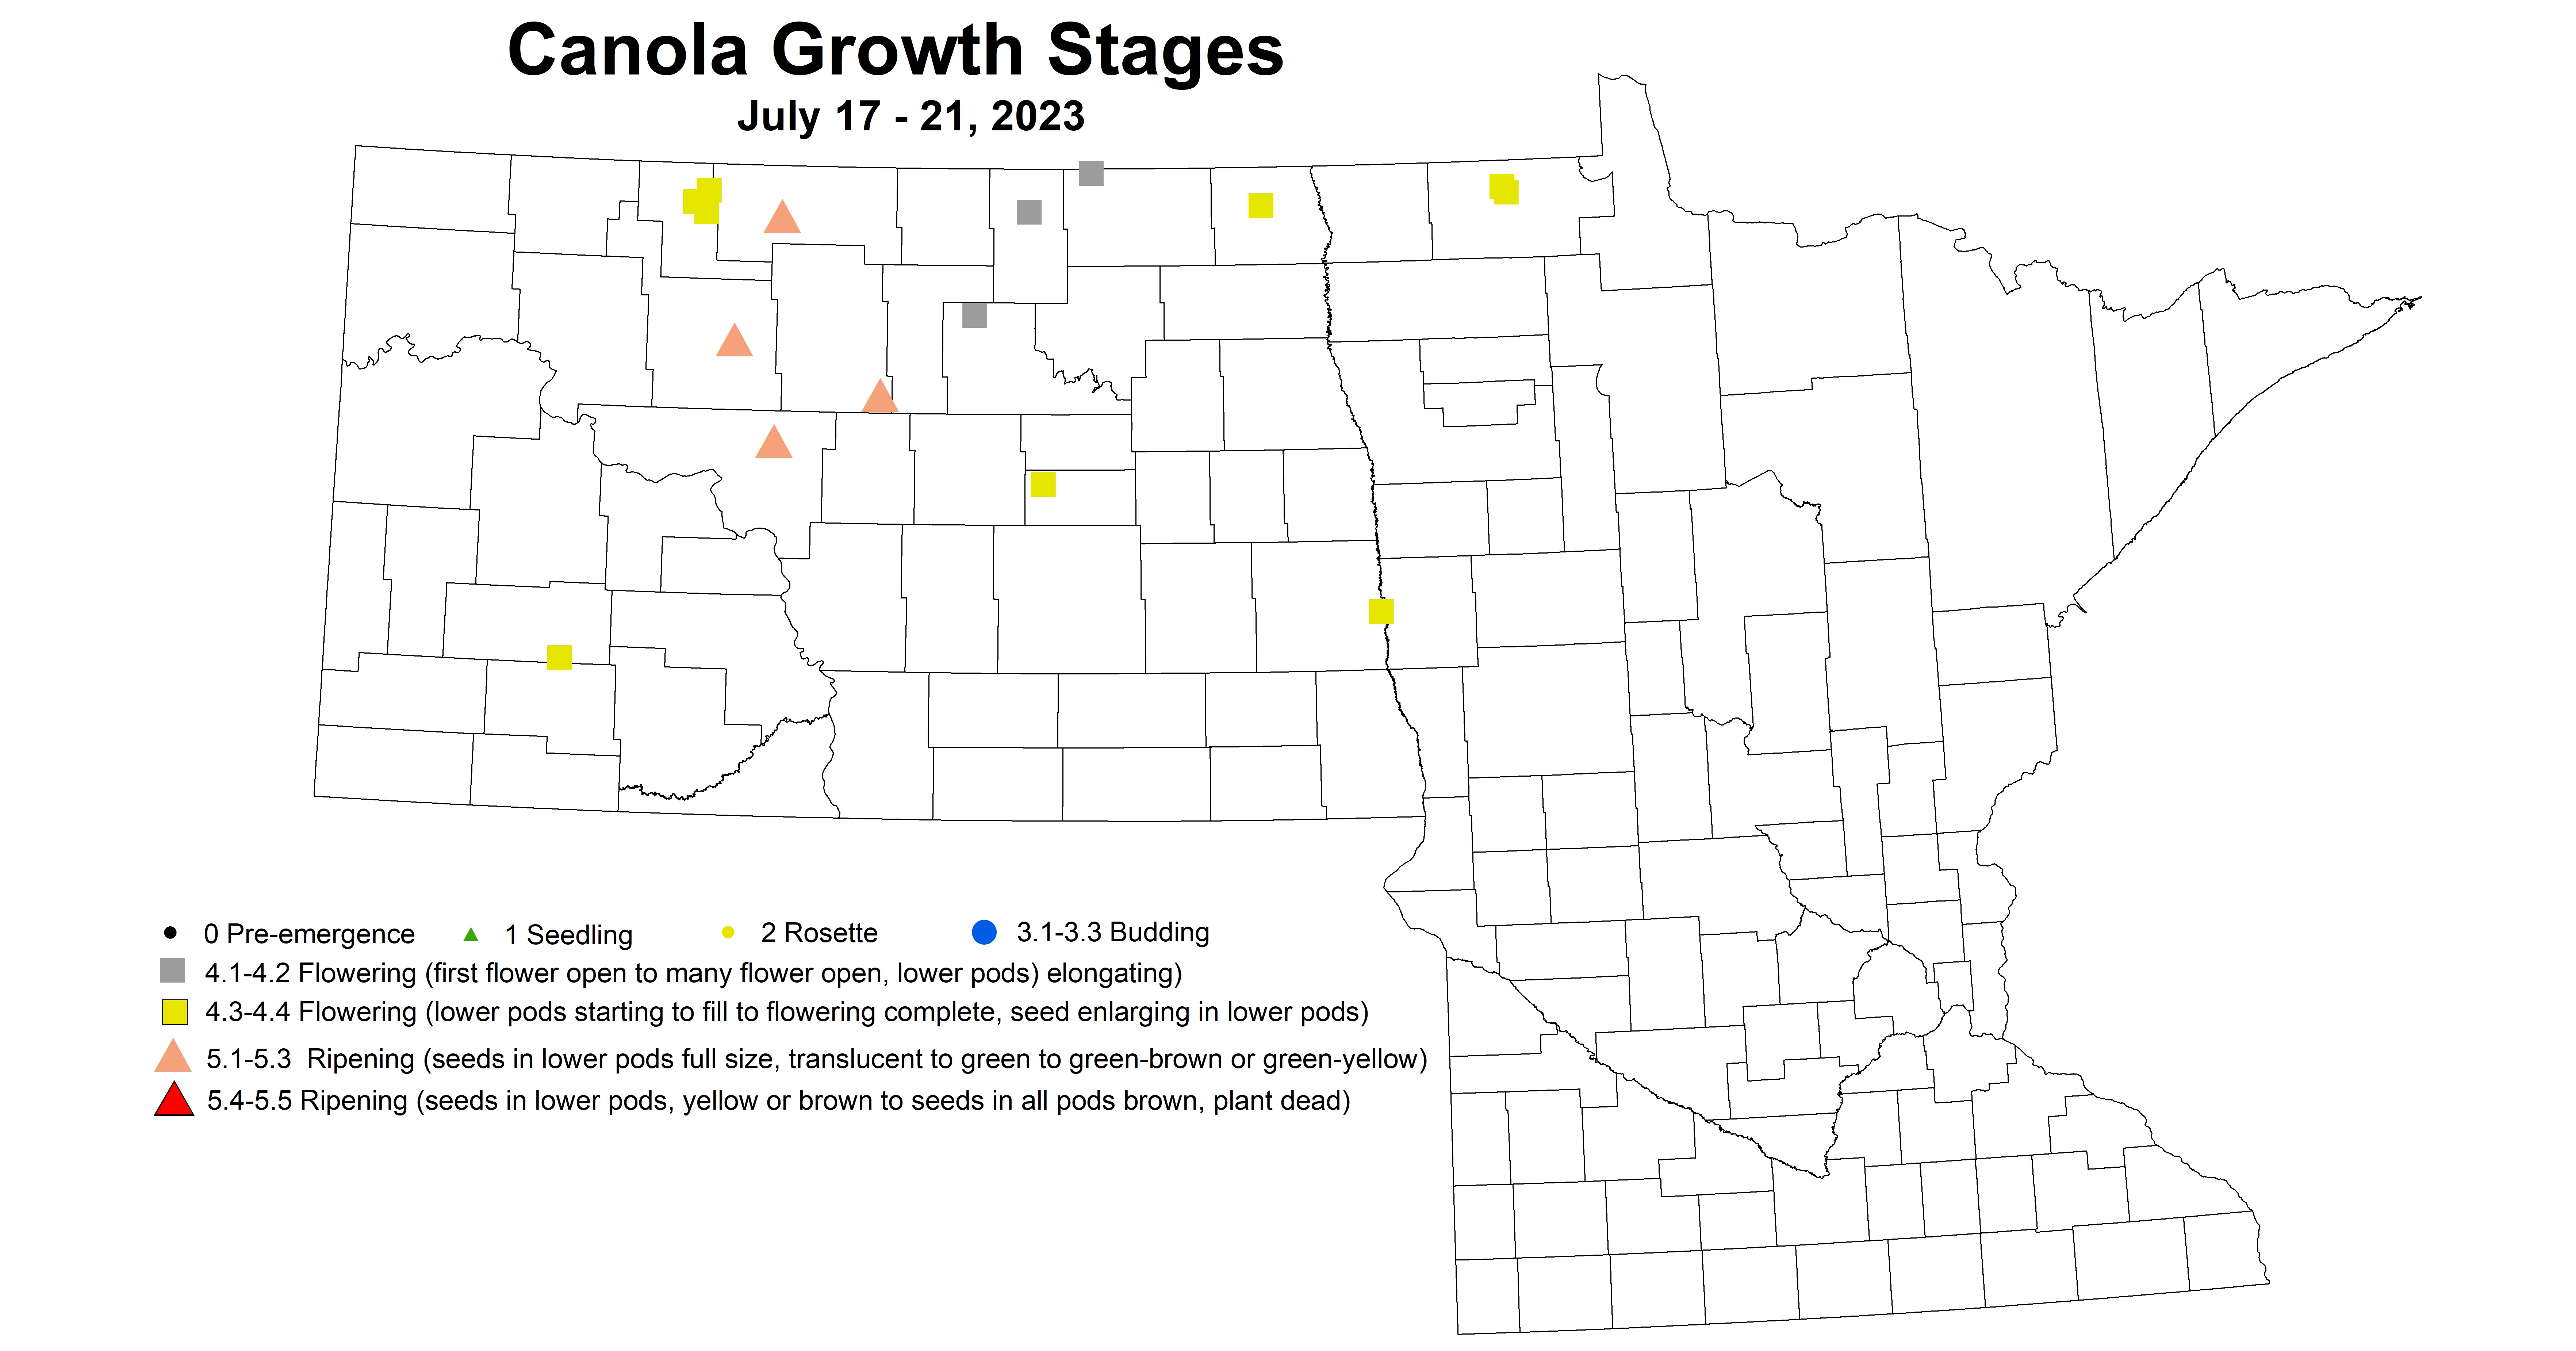 canola growth stages July 17-21 2023